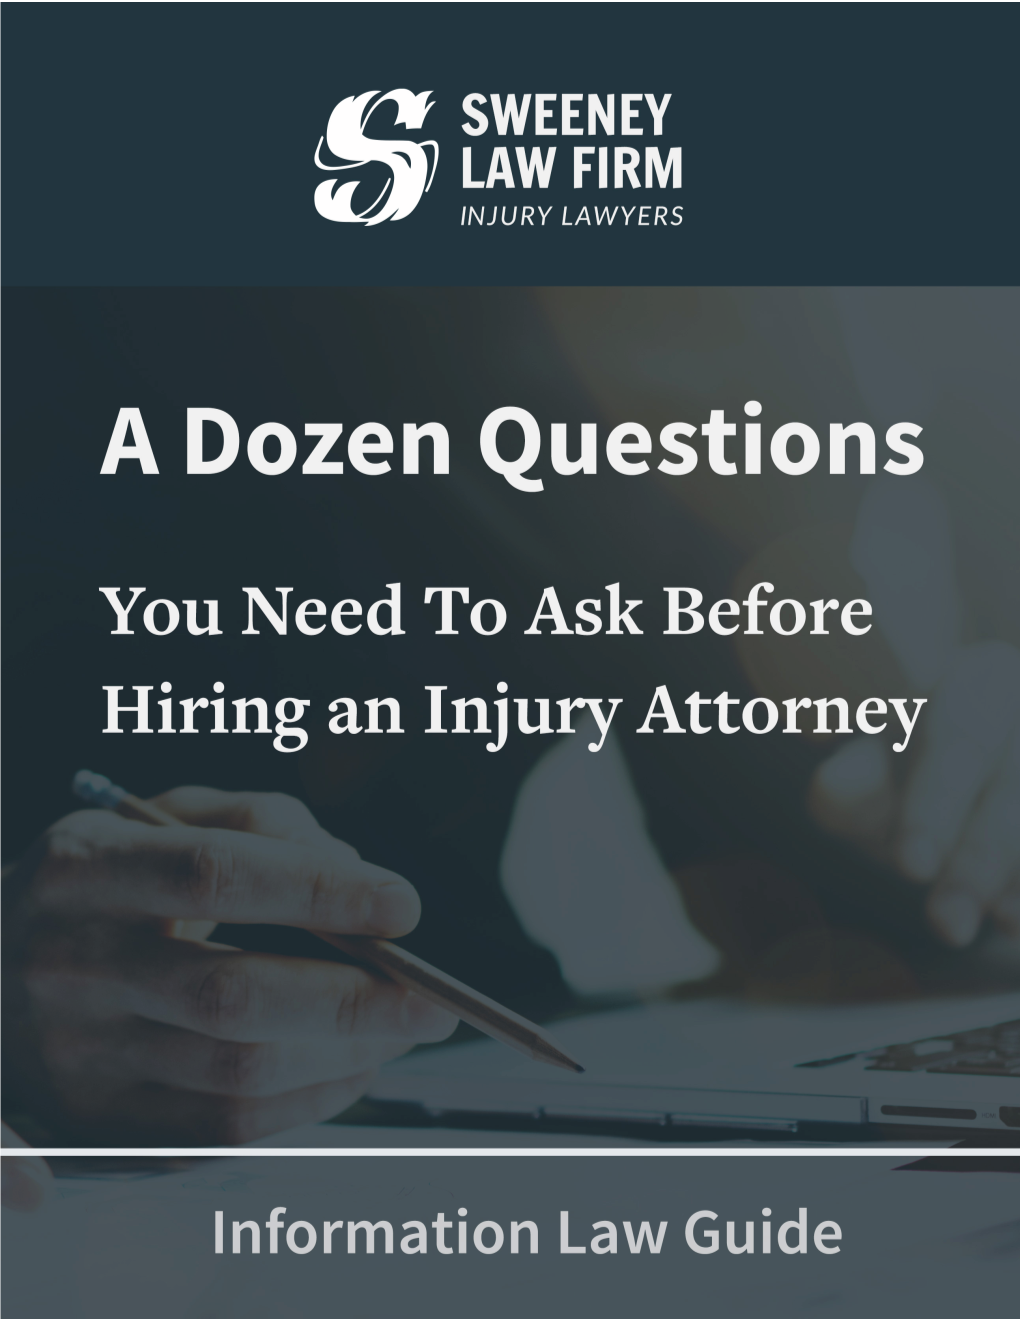 A Dozen Questions You Need to Ask Before Hiring an Injury Lawyer